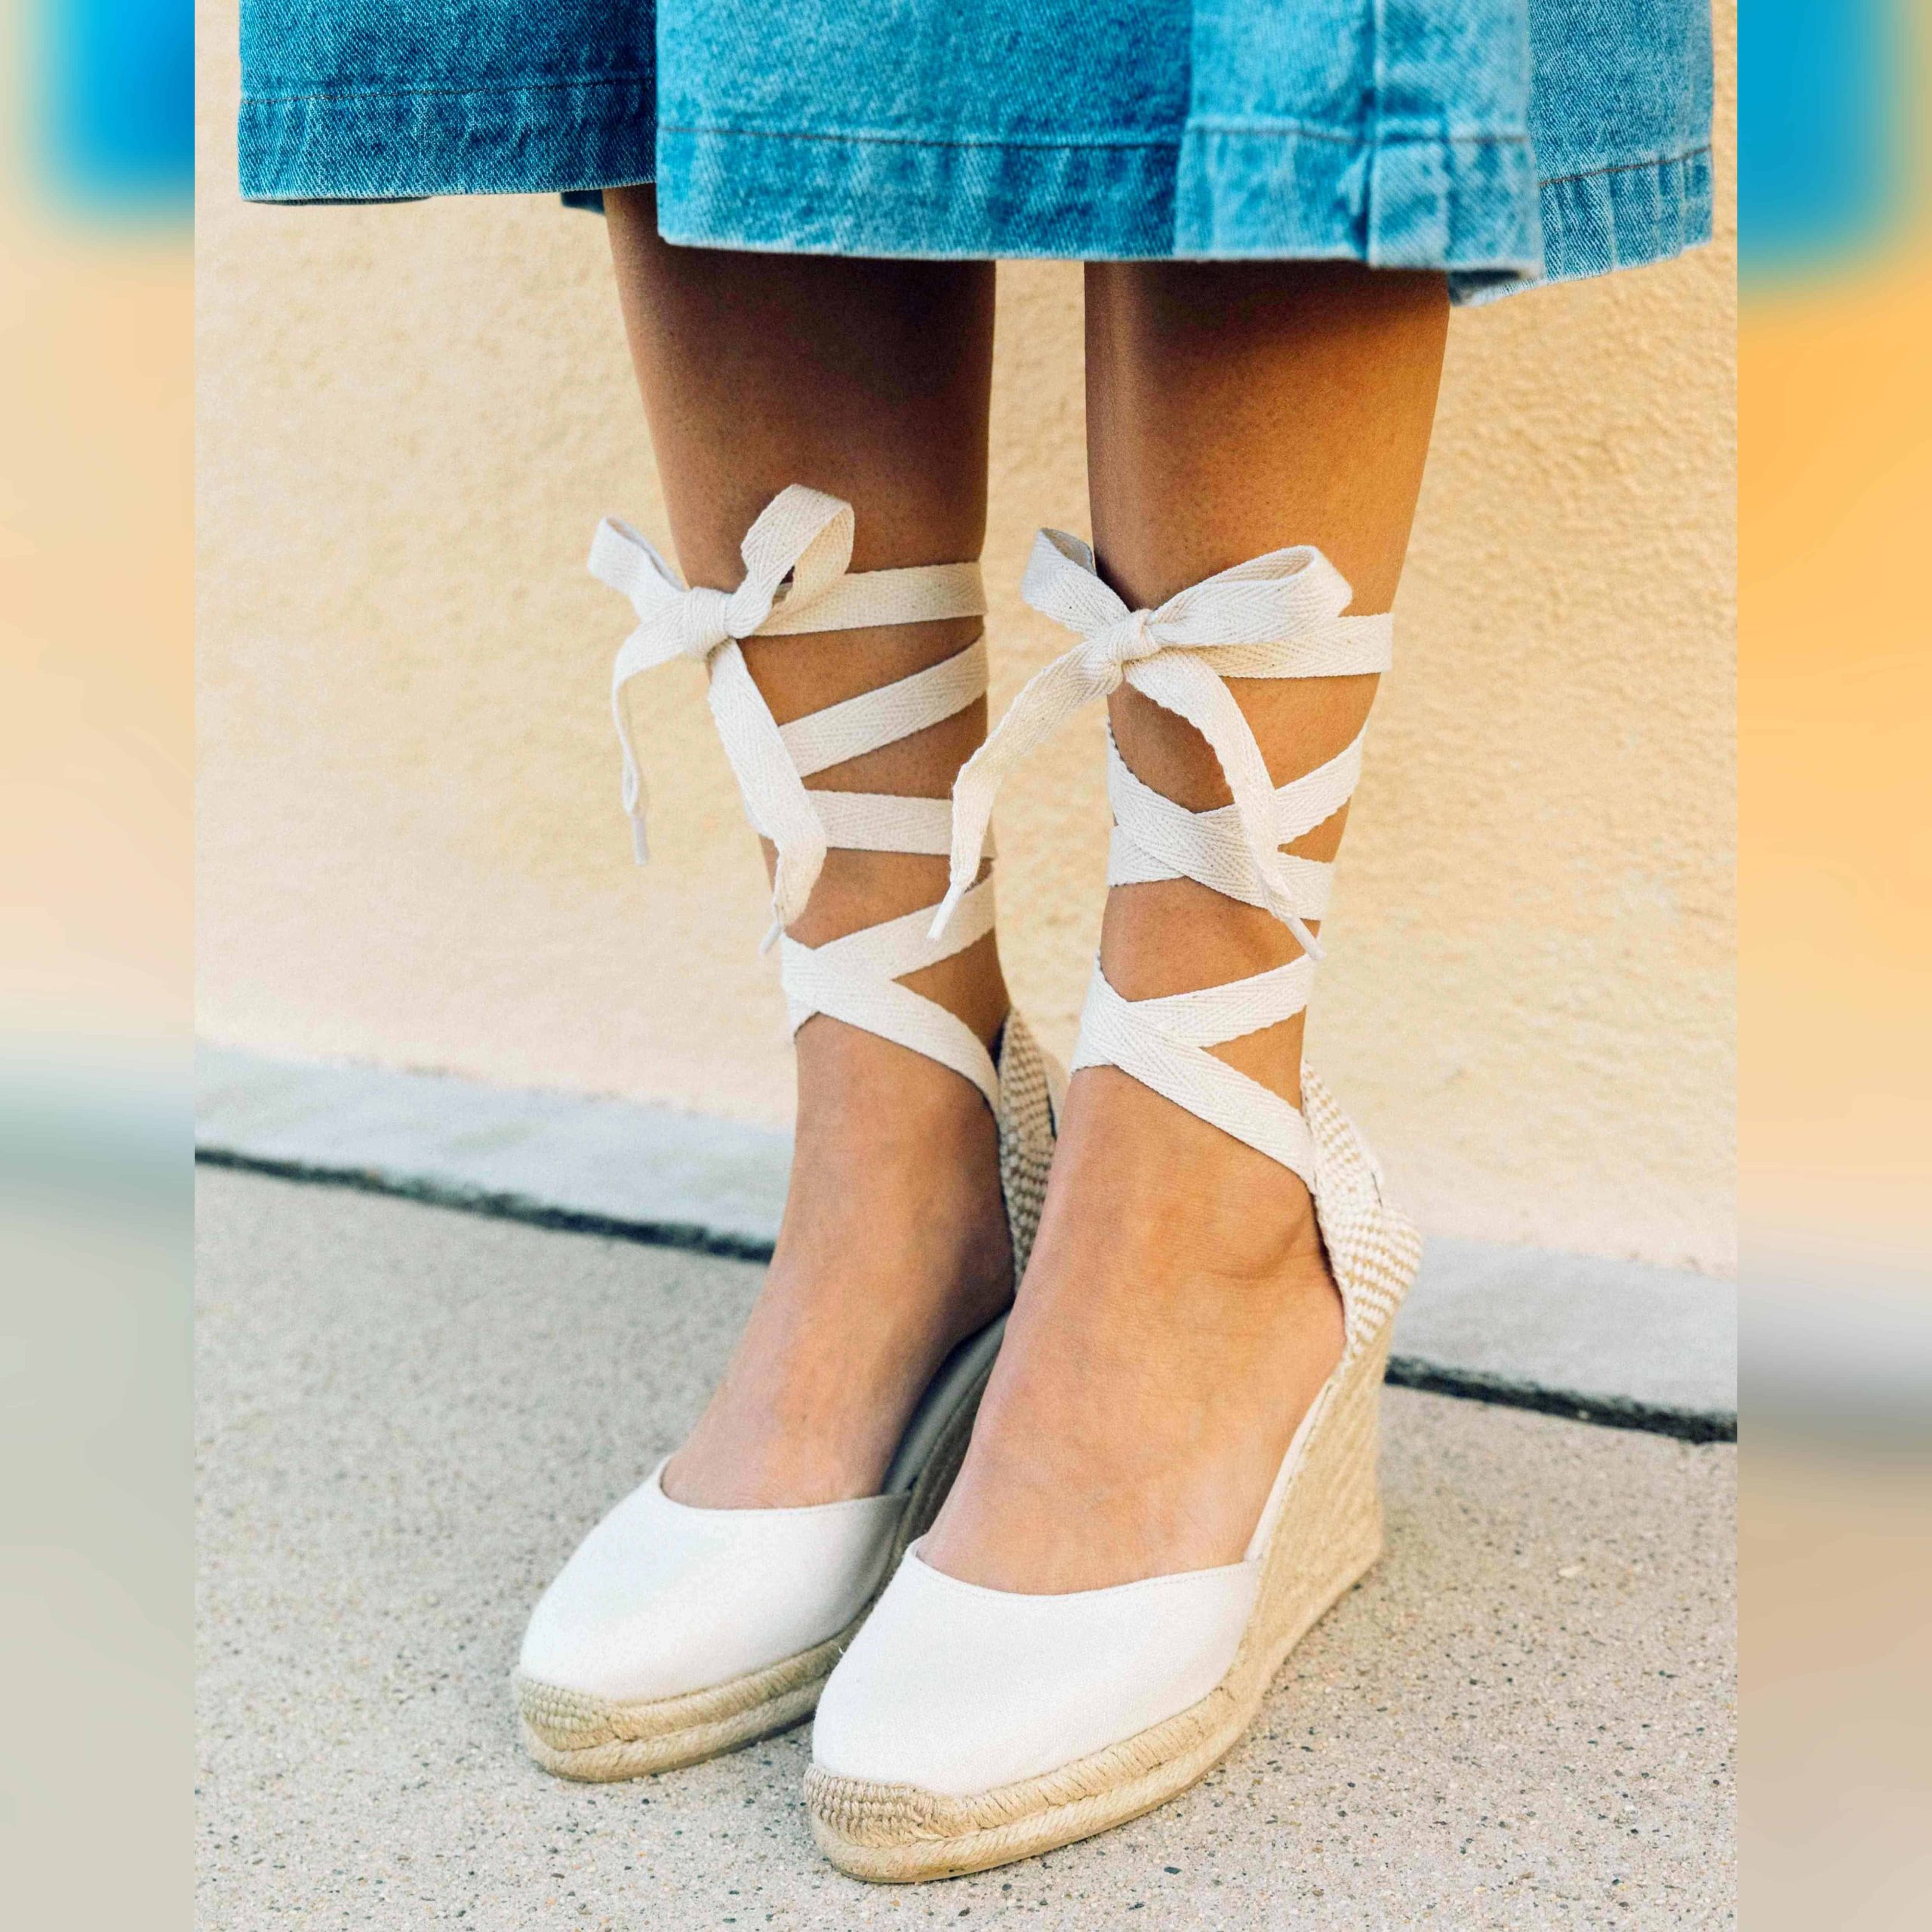 How To Wear Espadrilles: Tricks To Wear Them This Way 2023